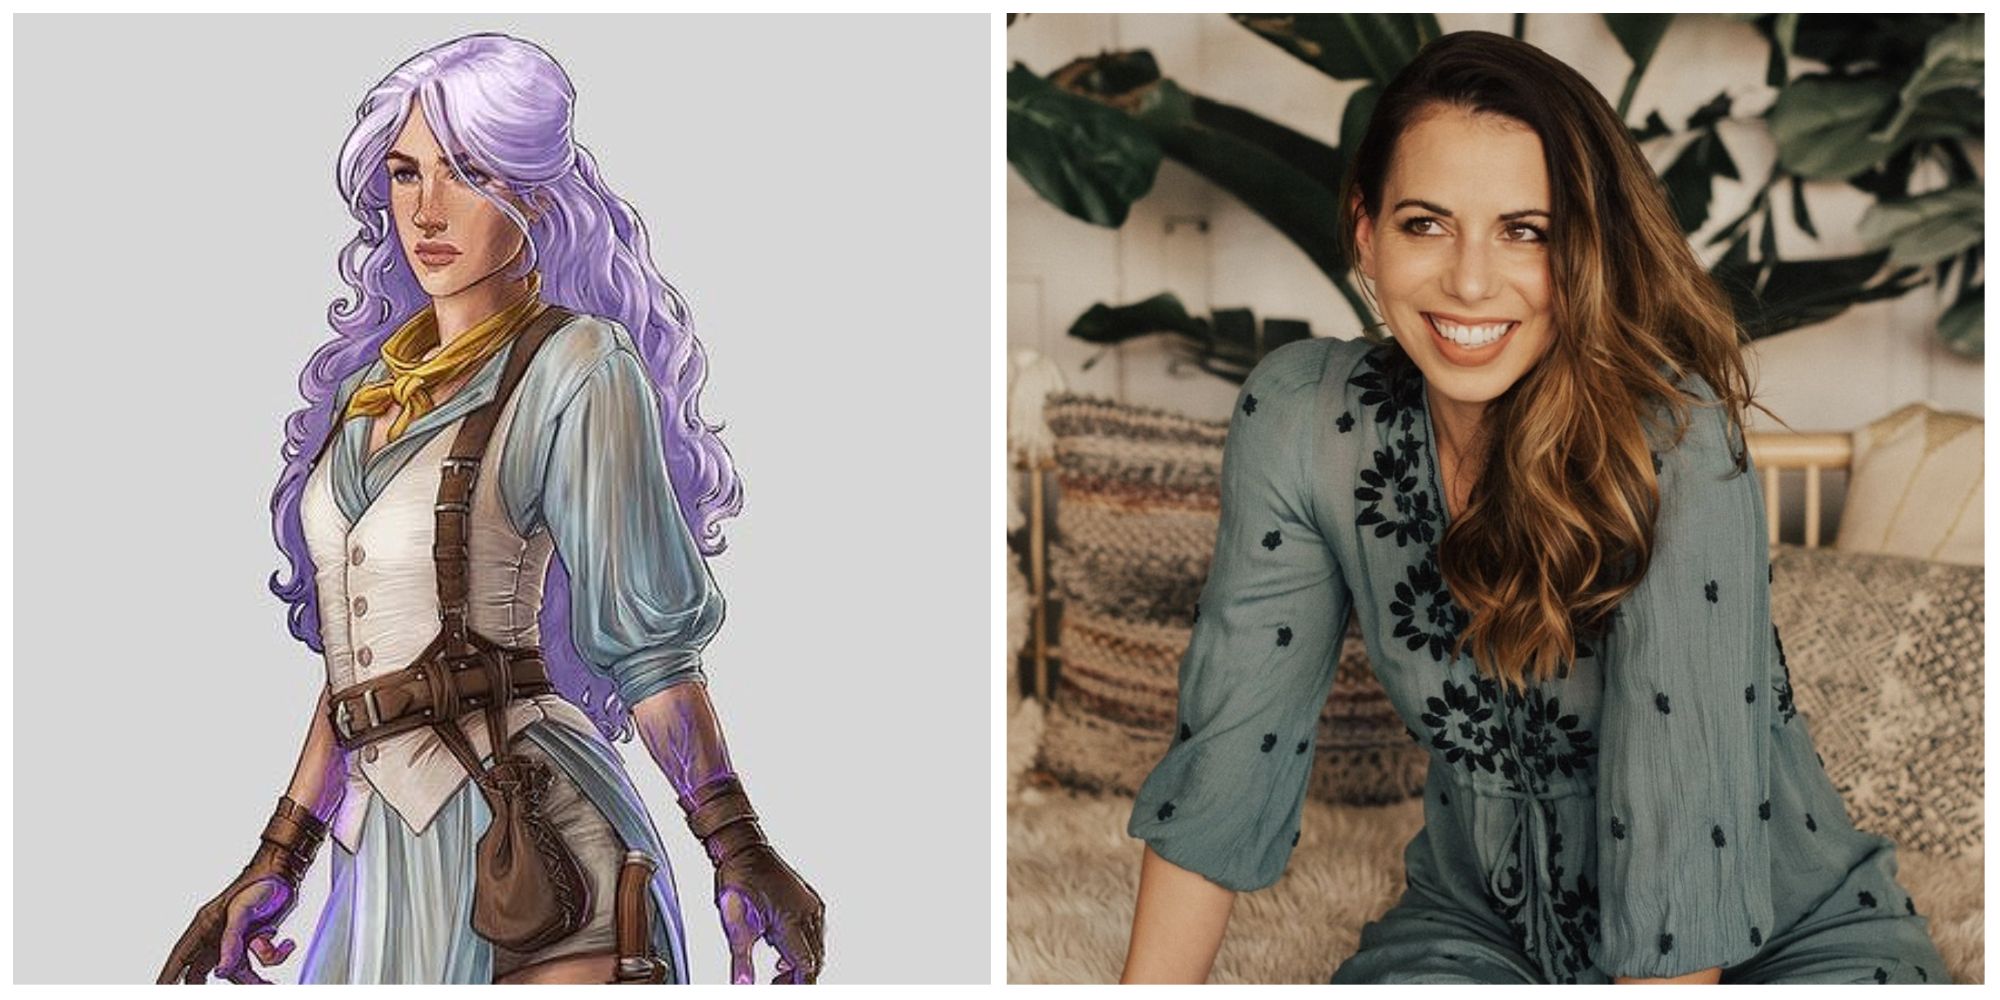 Imogen Temult of Critical Role on the left and Laura Bailey on the right